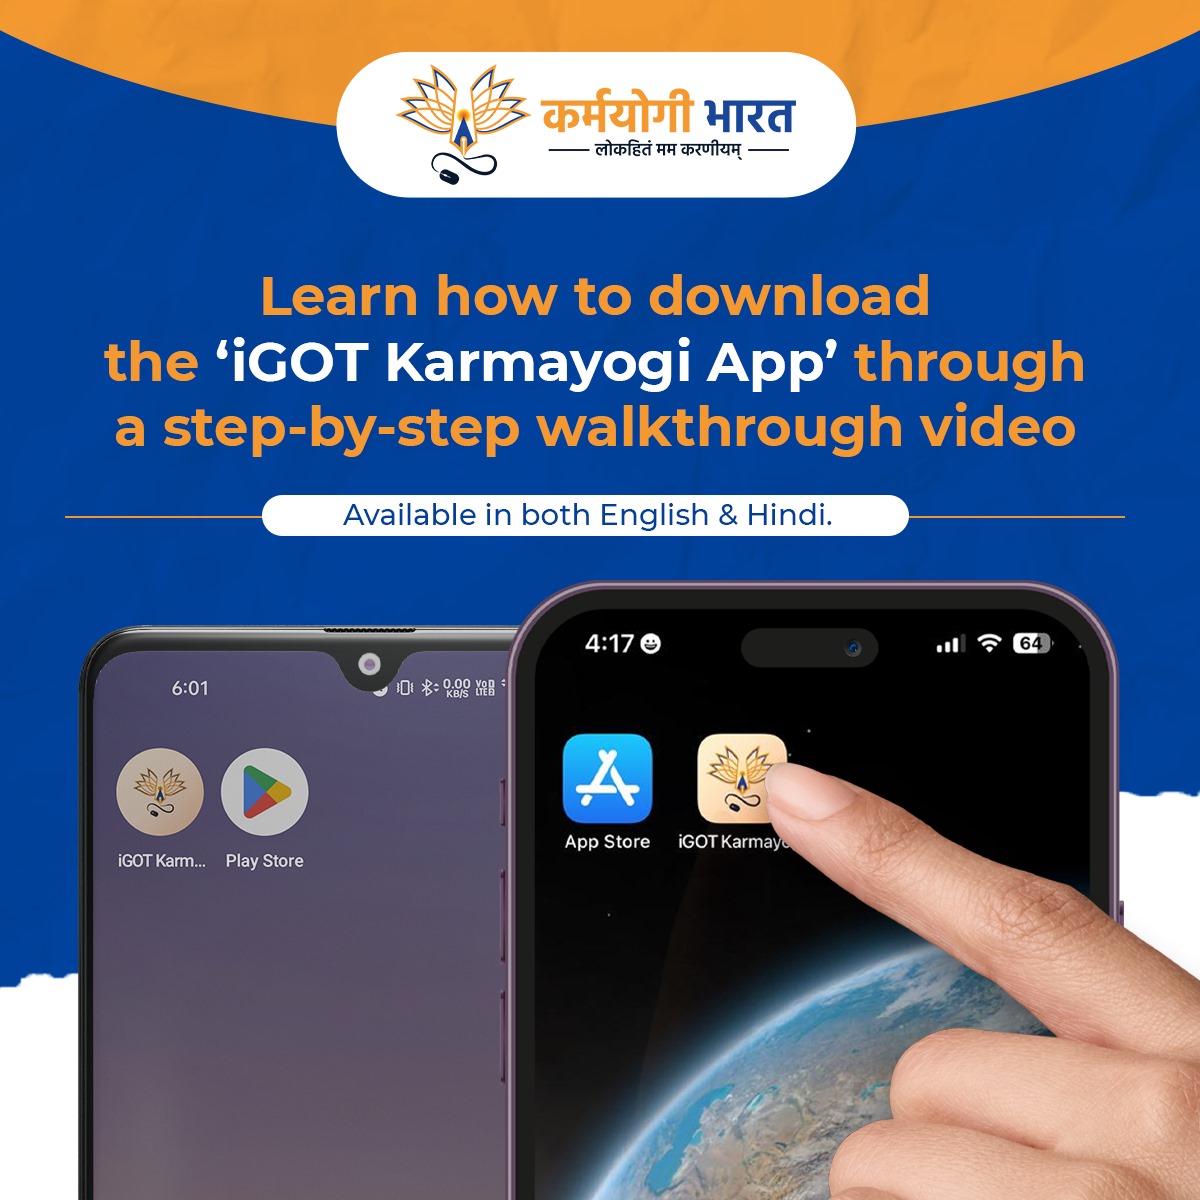 Learn anytime, anywhere with the iGOT Karmayogi App. Watch the step-by-step guide, to help you easily download the iGOT Karmayogi App on your device, and learn on the go! 🔗 Links to the video: For Android Users - youtu.be/bJ7JaHjaLKk For iOS Users - youtu.be/zHCJ2UlRG5o